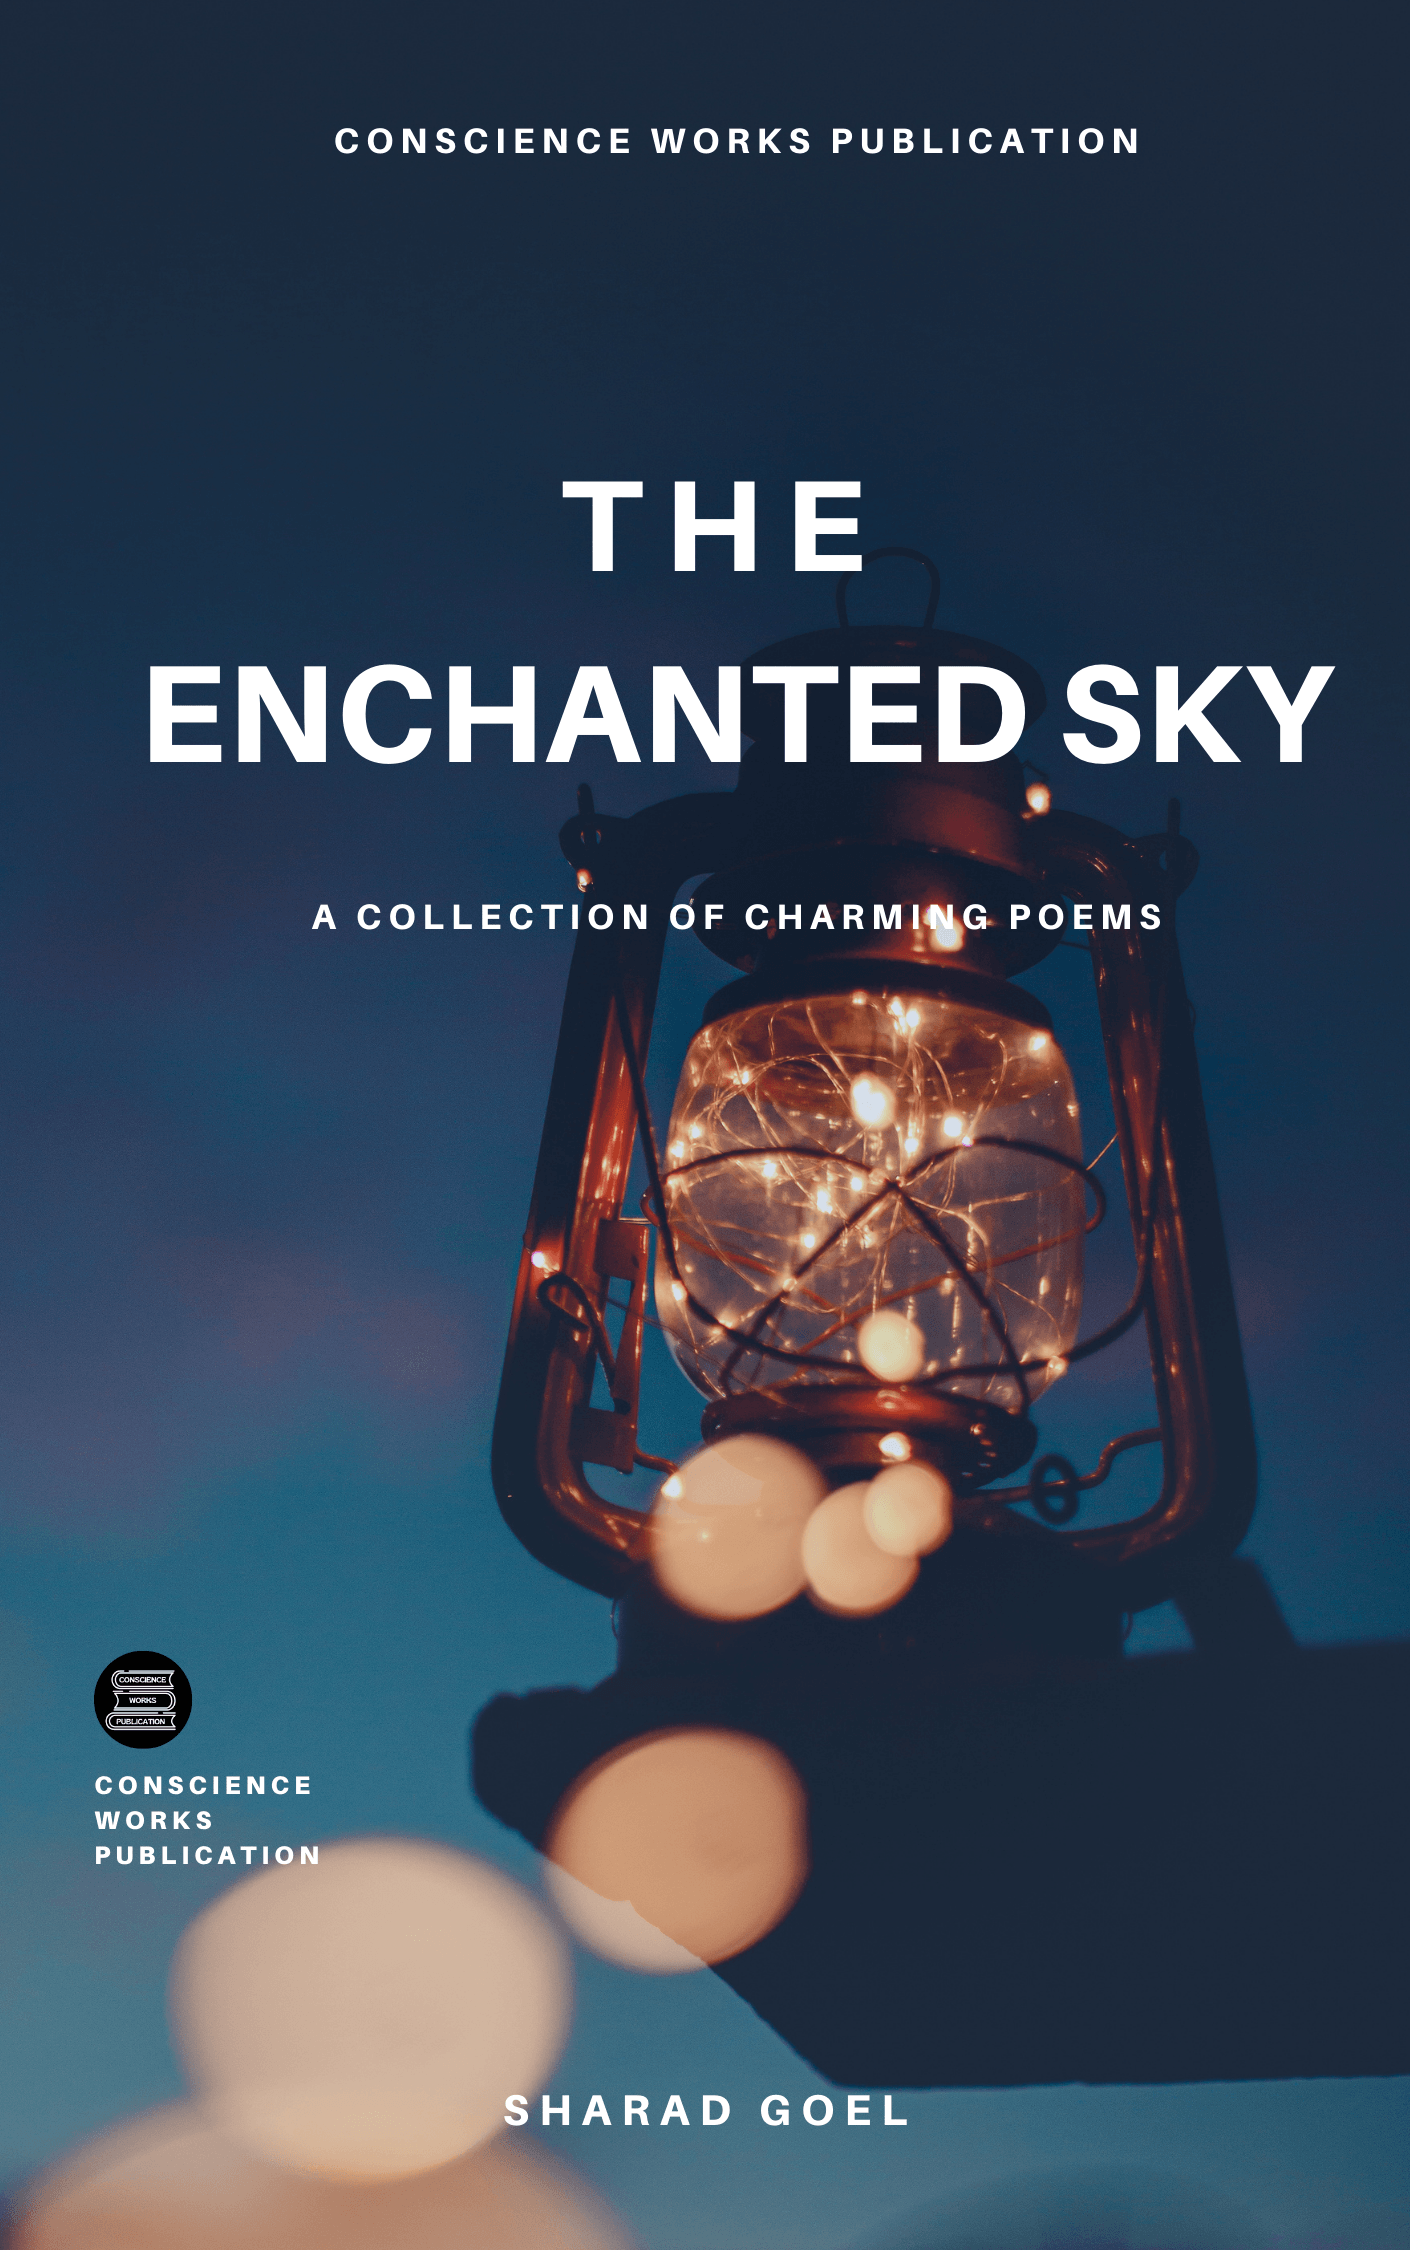 The Enchanted Sky by sharad goel - CONSCIENCE WORKS